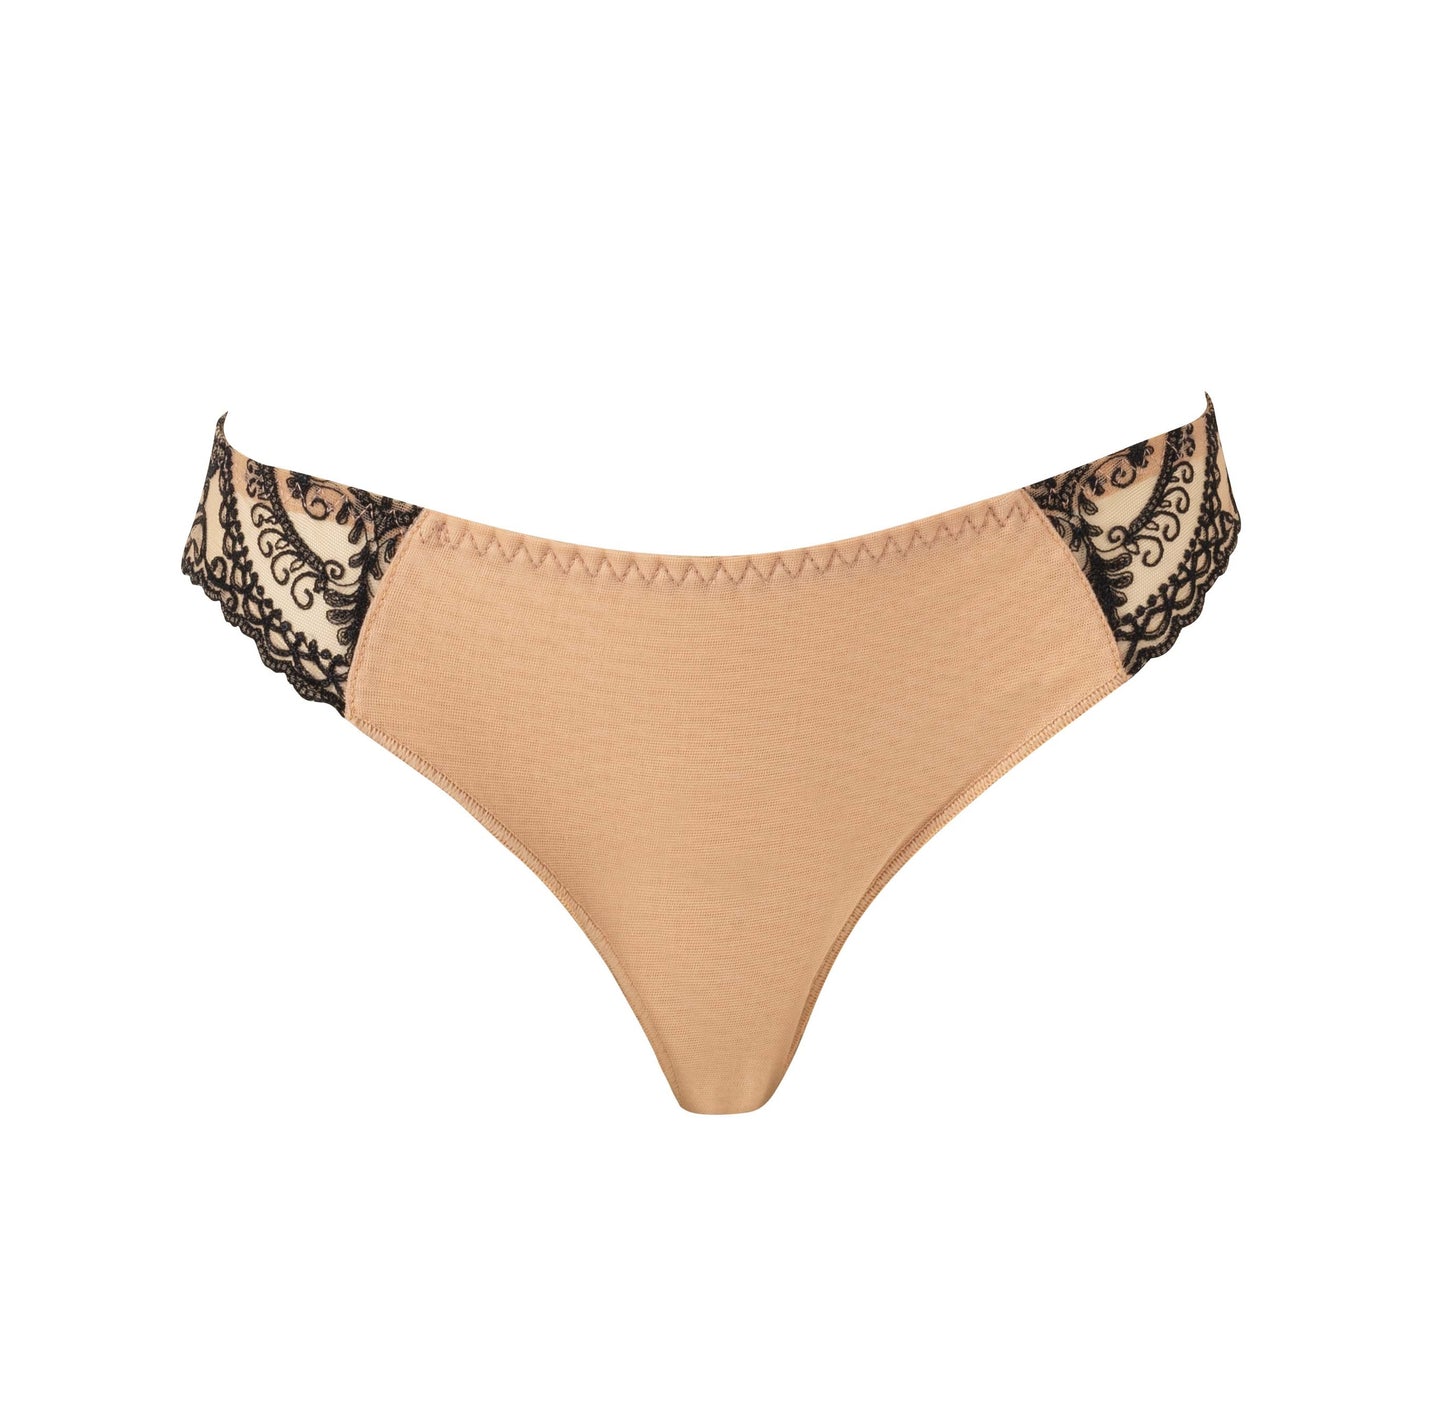 Sophisticated and luxuriously embroidered Brazilian brief panties from the Kant line by Louisa Bracq from France at DiModa Lingerie Toronto.